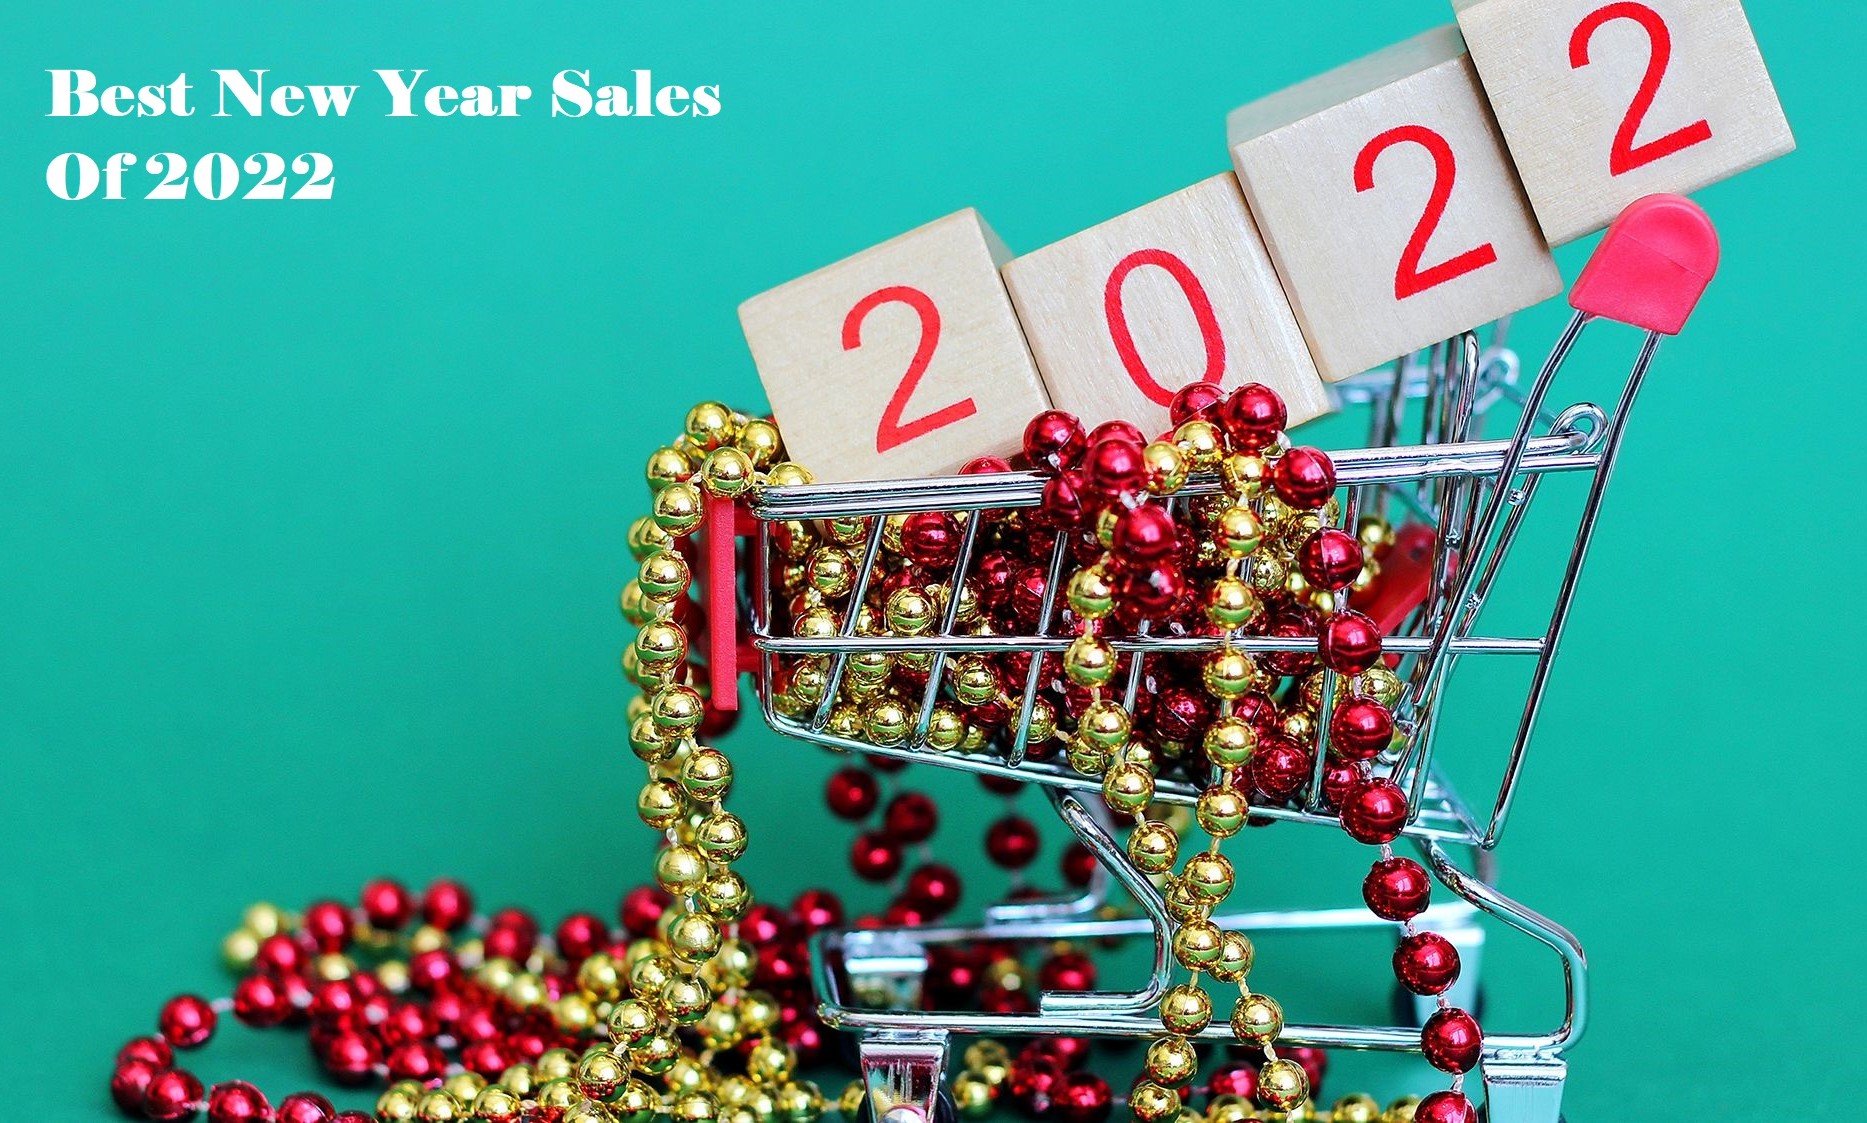 Best New Year Sales Of 2022